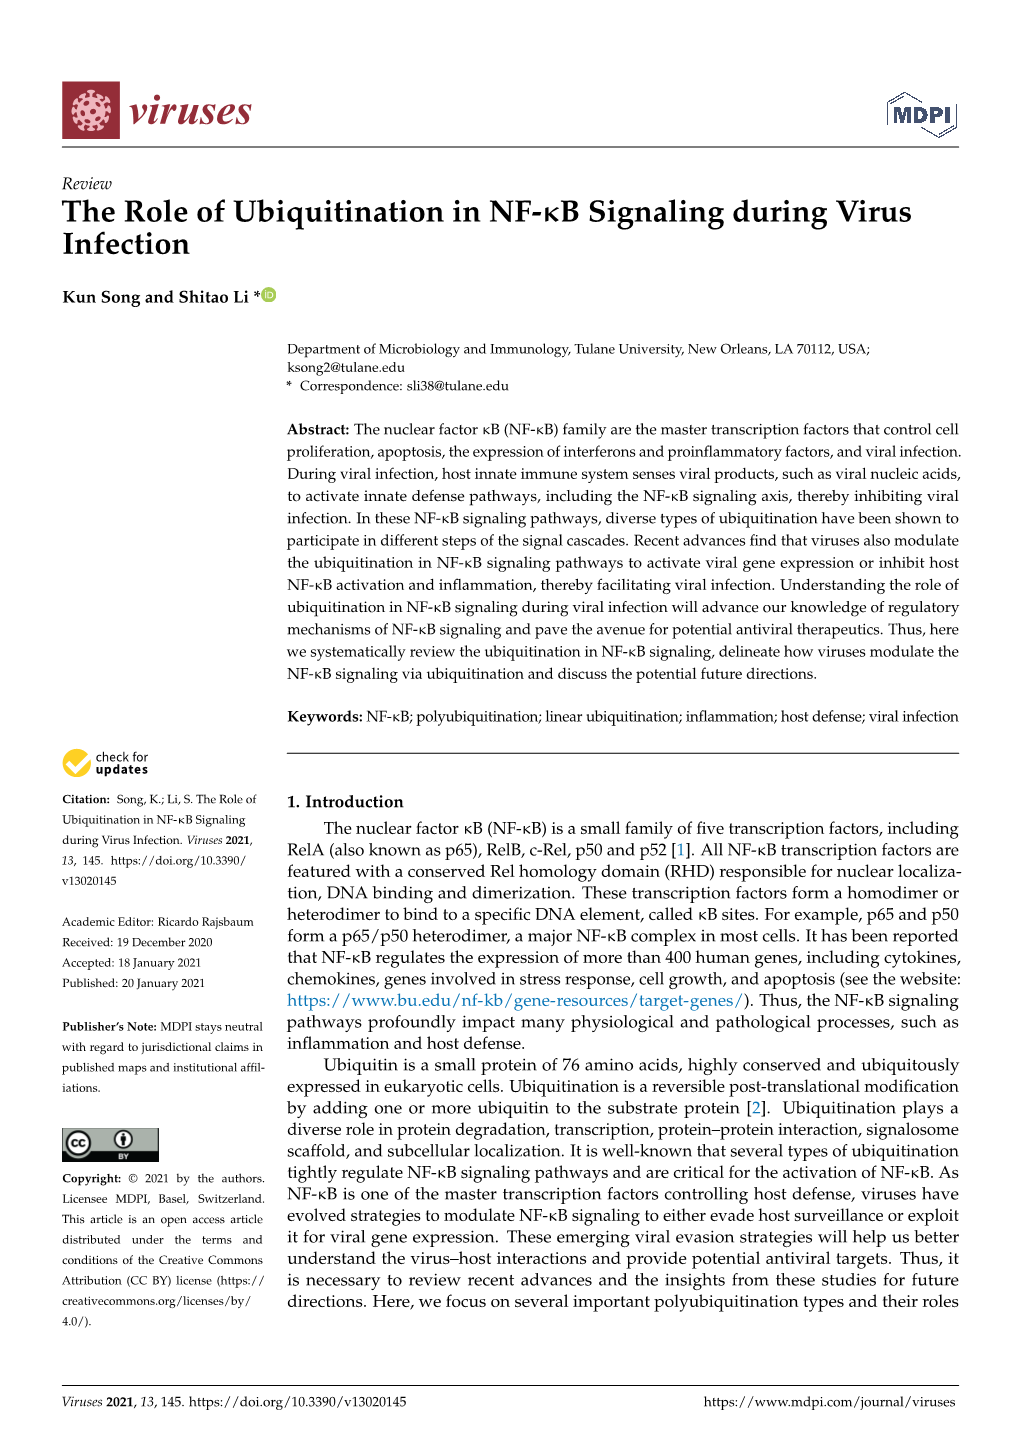 The Role of Ubiquitination in NF-Κb Signaling During Virus Infection